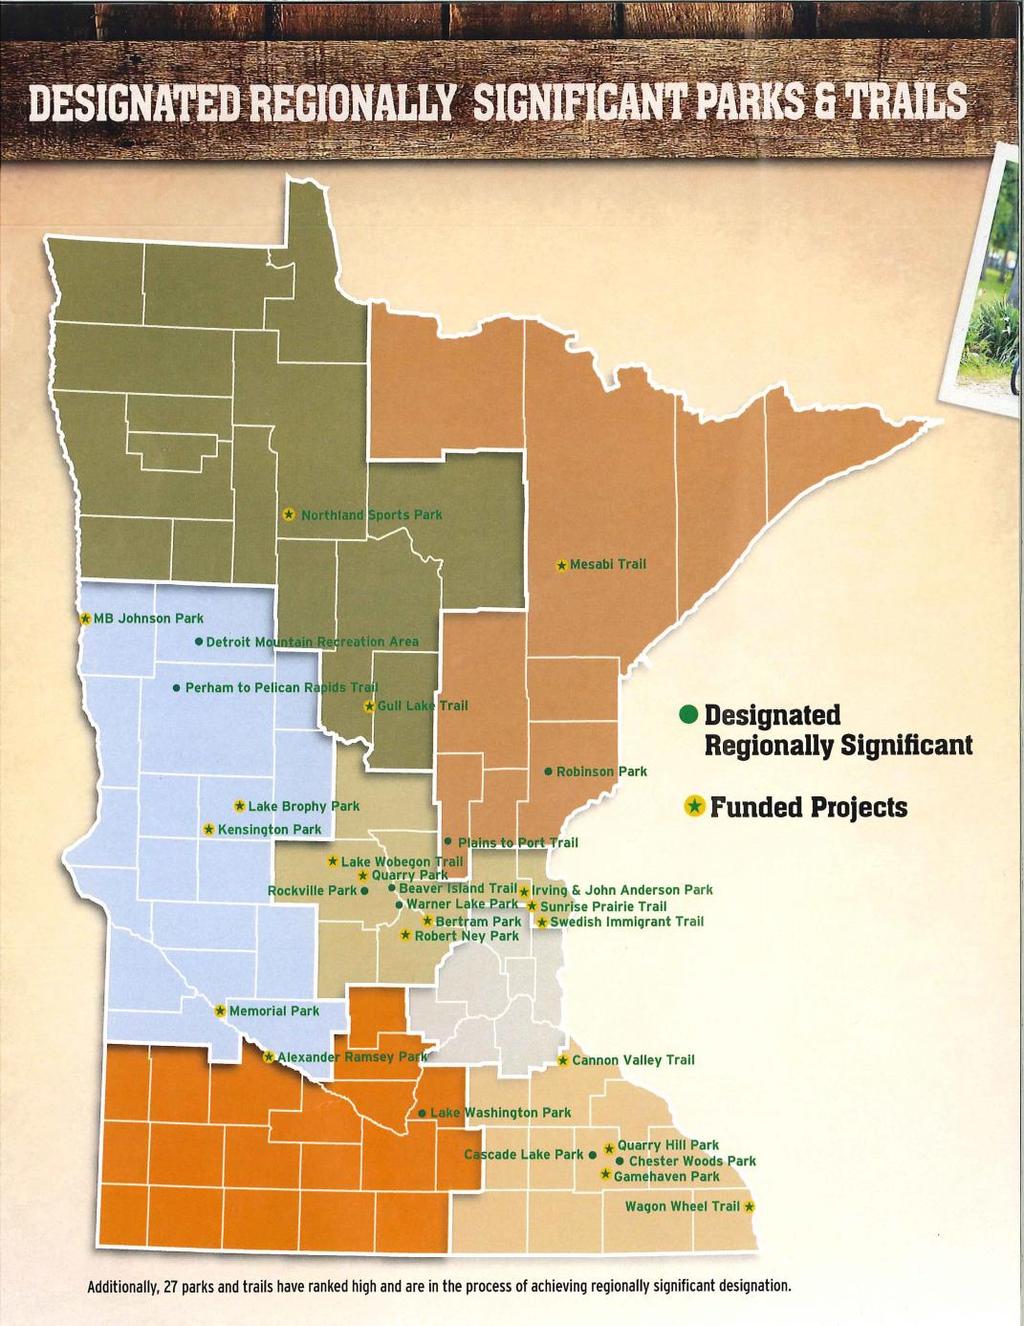 The three systems funded by Legacy are different: Greater Minnesota Regional Parks and Trail Commission: A brand new system of regional parks outside the Twin Cities, created in 2013 in response to